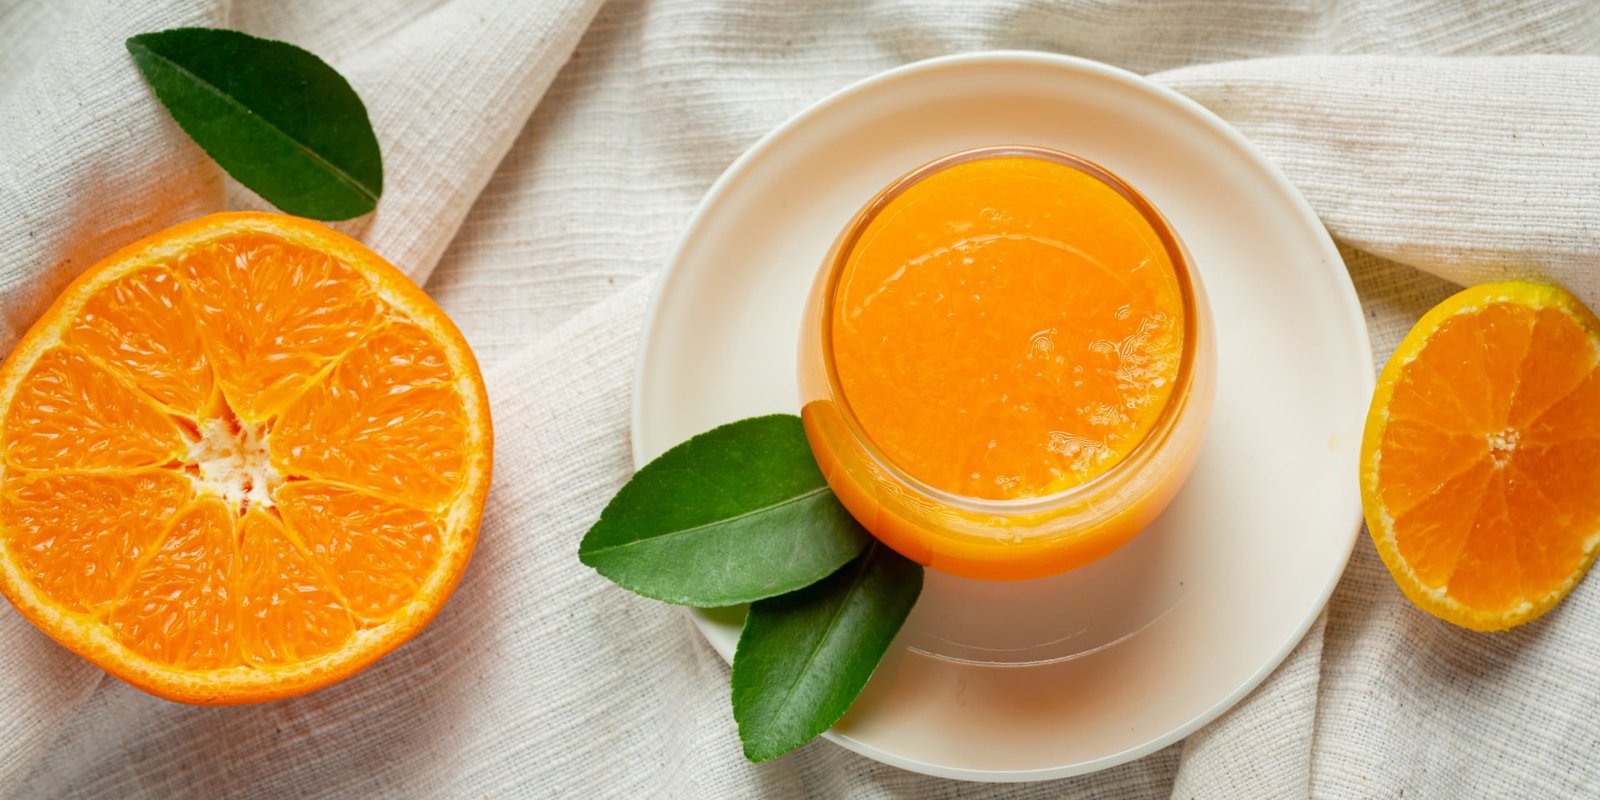 Vitamin C - what we should know about it